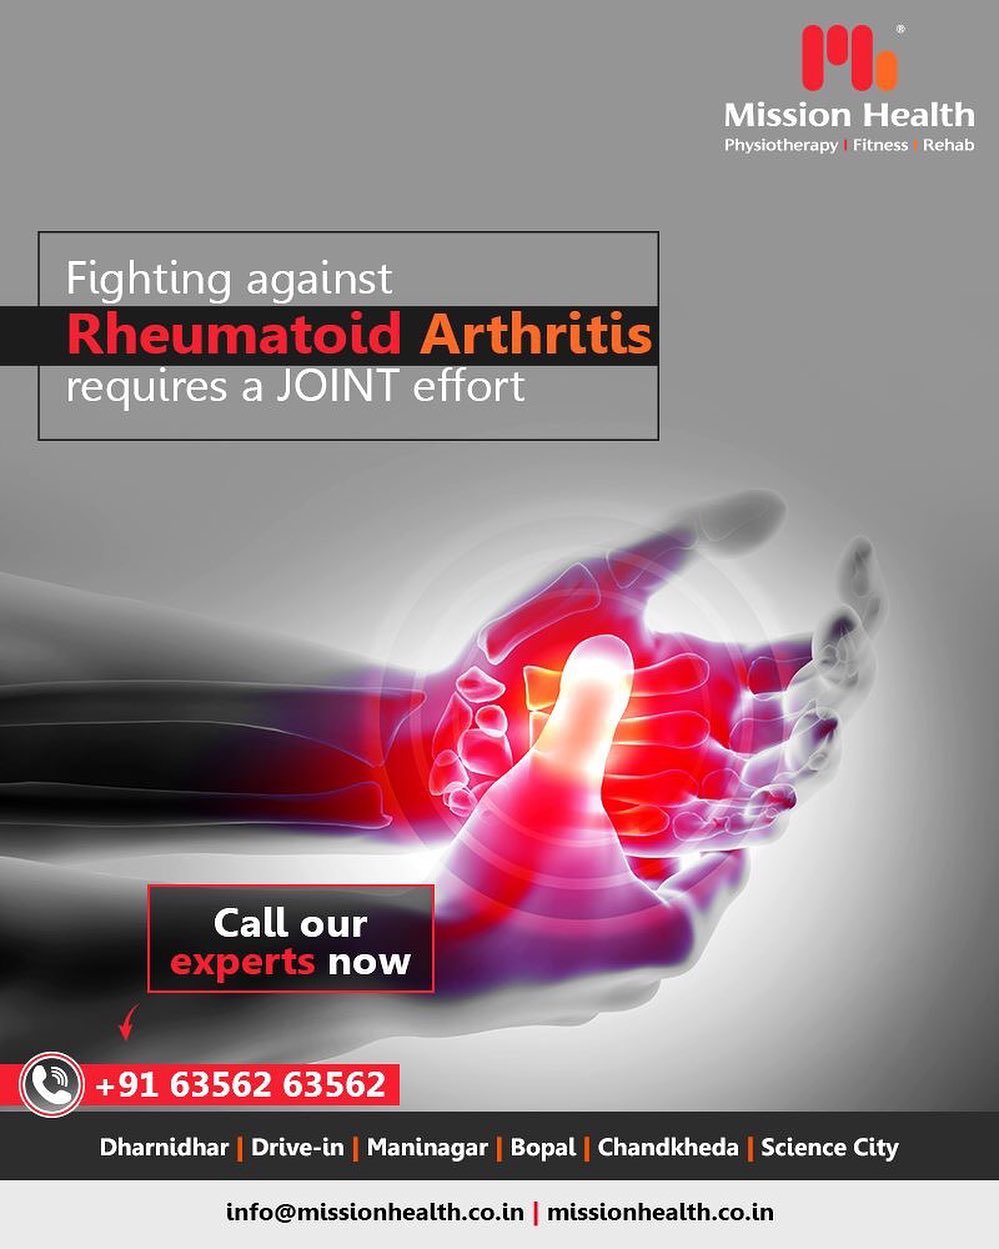 #RheumatoidArthritis requires a JOINT effort to find relief! At Mission Health our experts make sure they help you find quick relief from your RA pain! 
#Fitness #MissionHealth #MissionHealthIndia #AbilityClinic #MovementIsLife